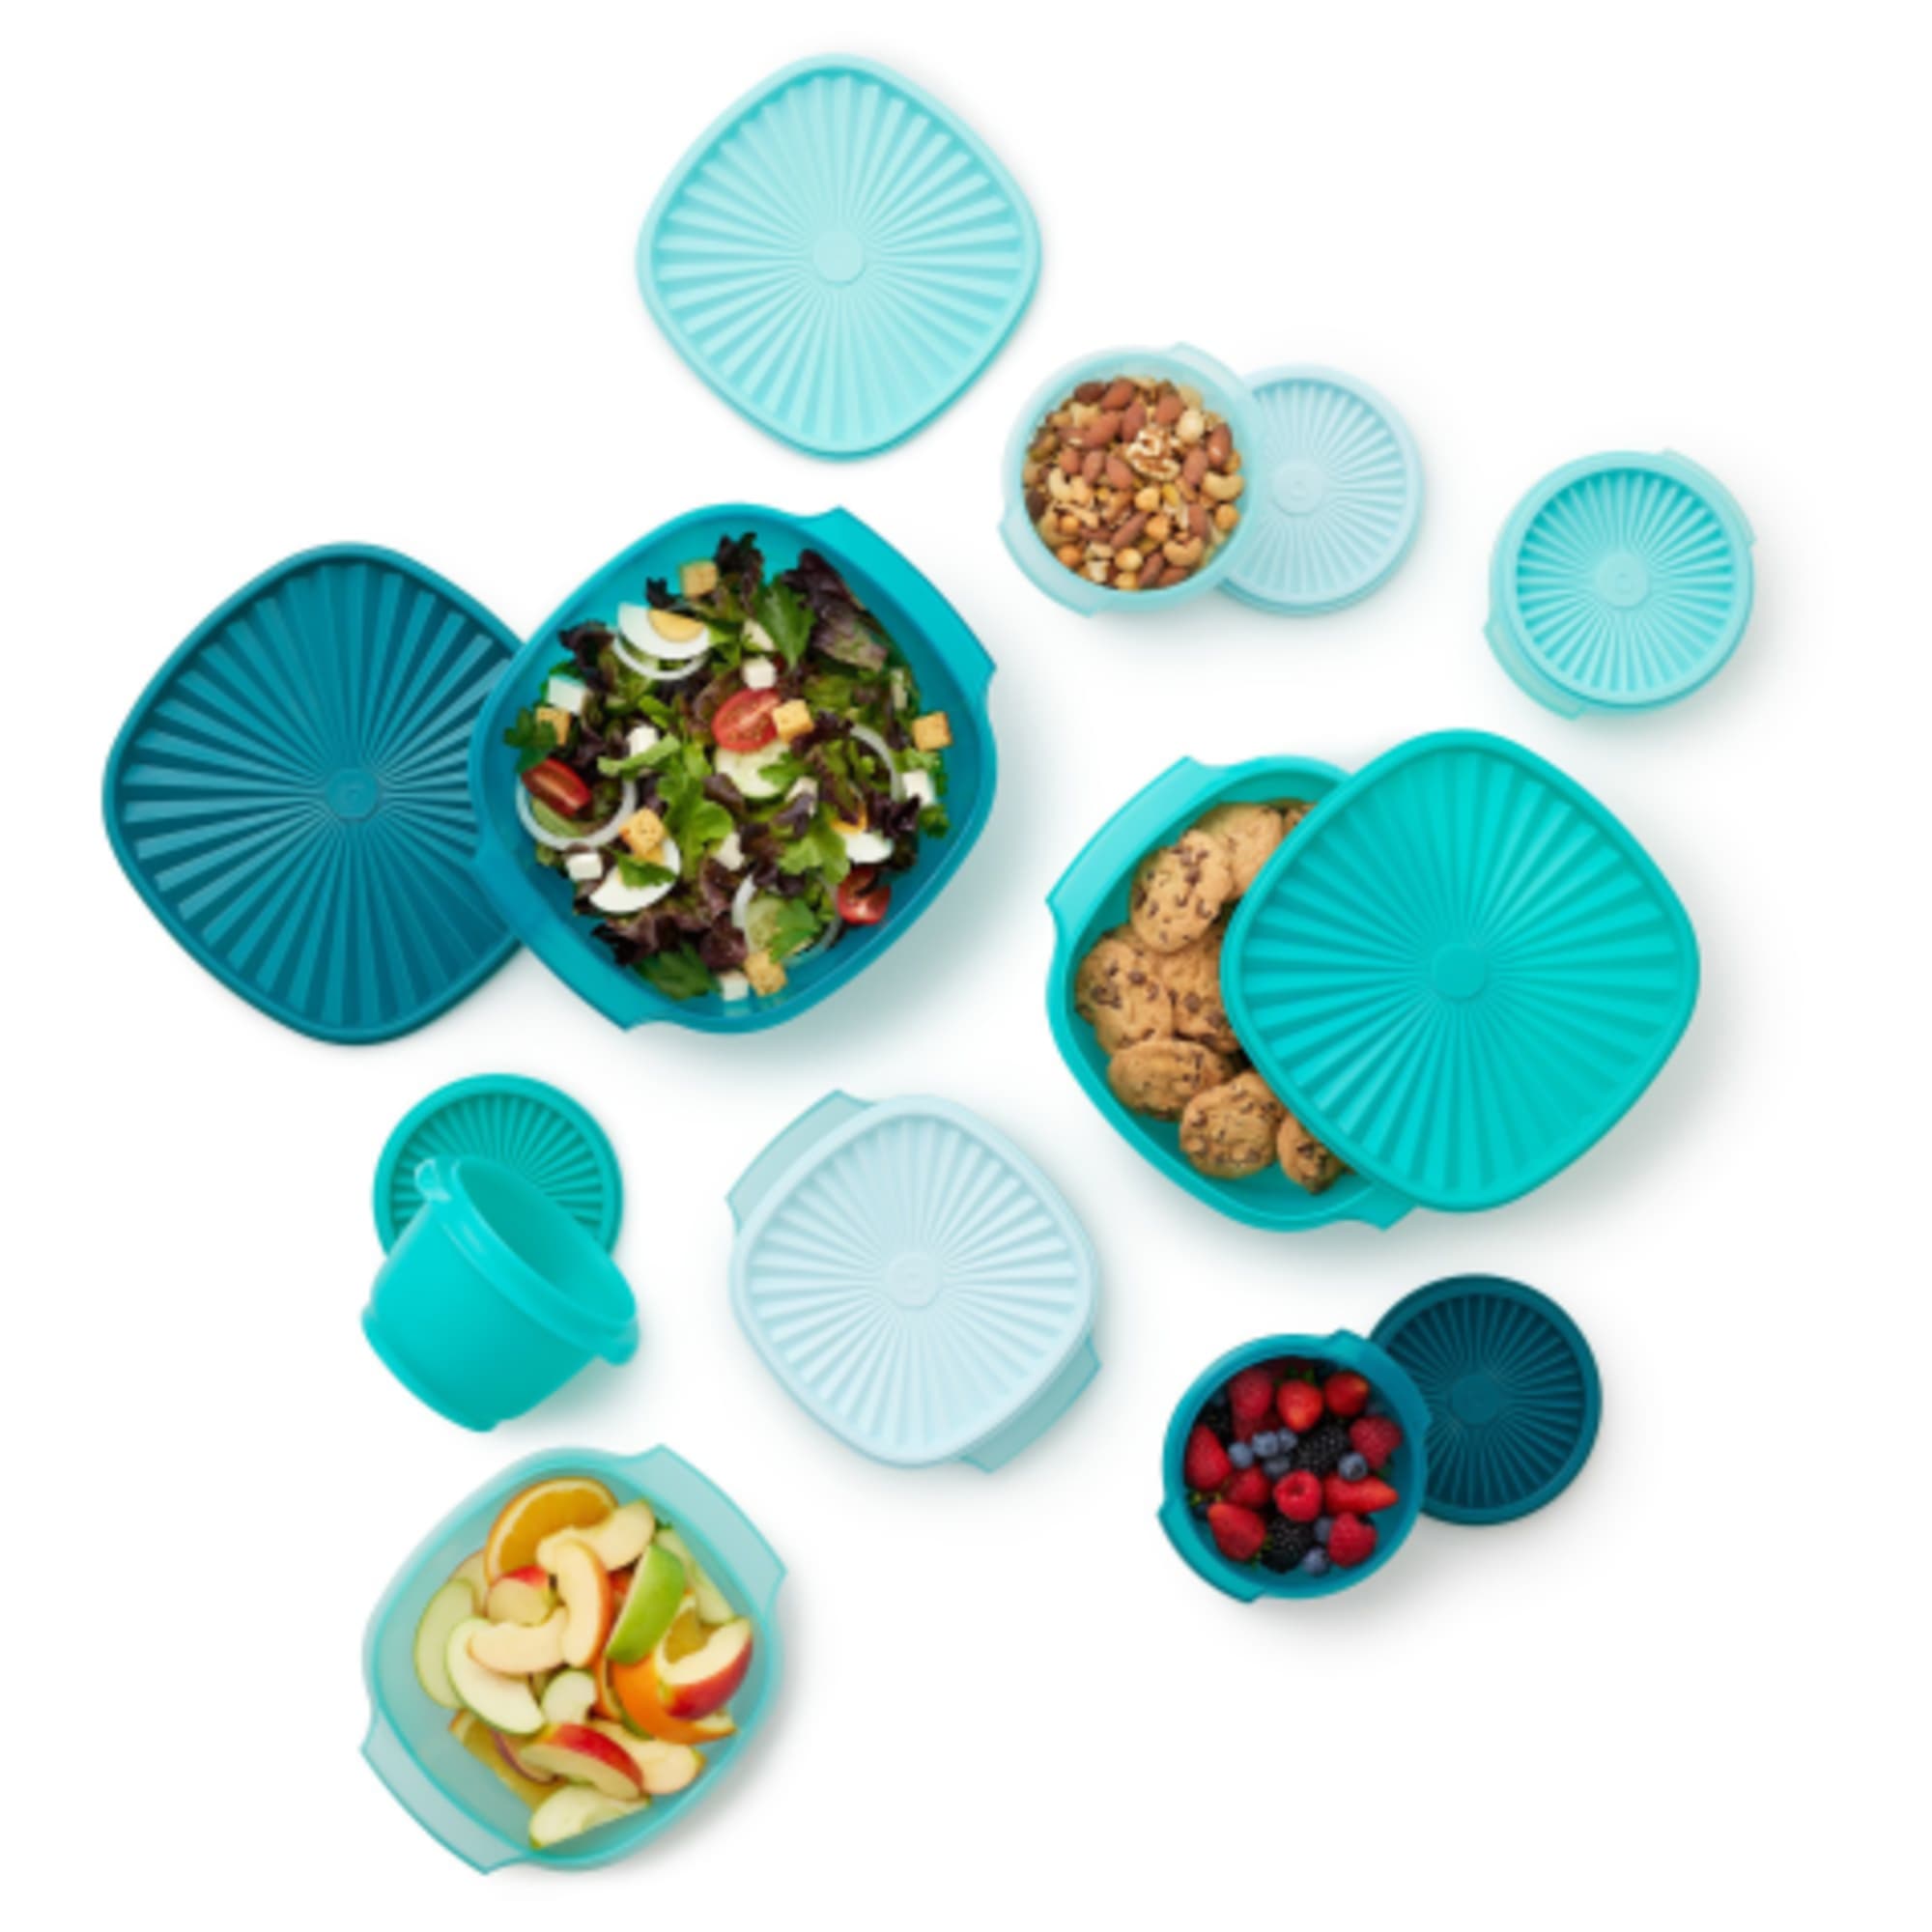 https://res.cloudinary.com/kitchenwarehouse/image/upload/c_fill,g_face,w_475/f_auto/t_PDP_2000x2000/Supplier%20Images%20/2000px/Tupperware-Heritage-Storage-Bowl-Set-8pc-Green_2_2000px.jpg?imagetype=pdp_thumbnail